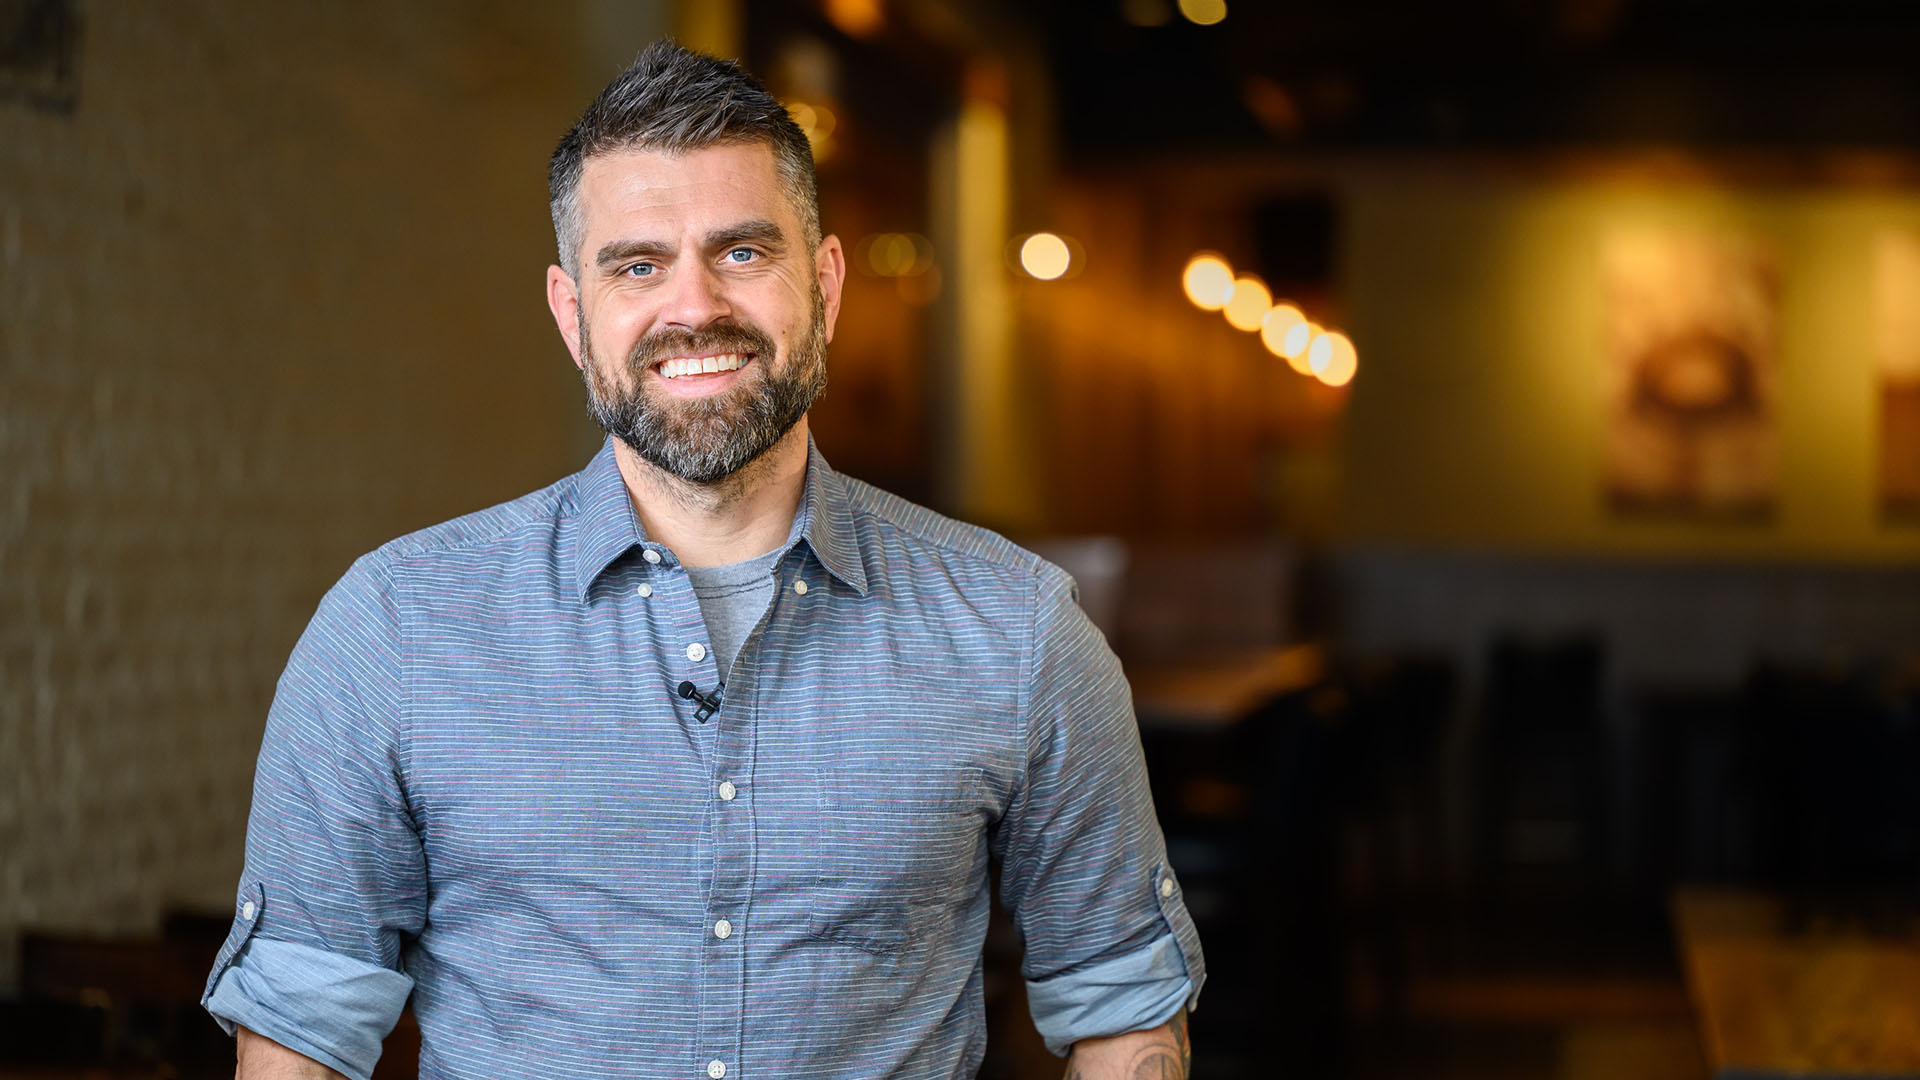 Wisconsin Foodie host Luke Zahm smiles at the camera from within a low-lit restaurant and bar.